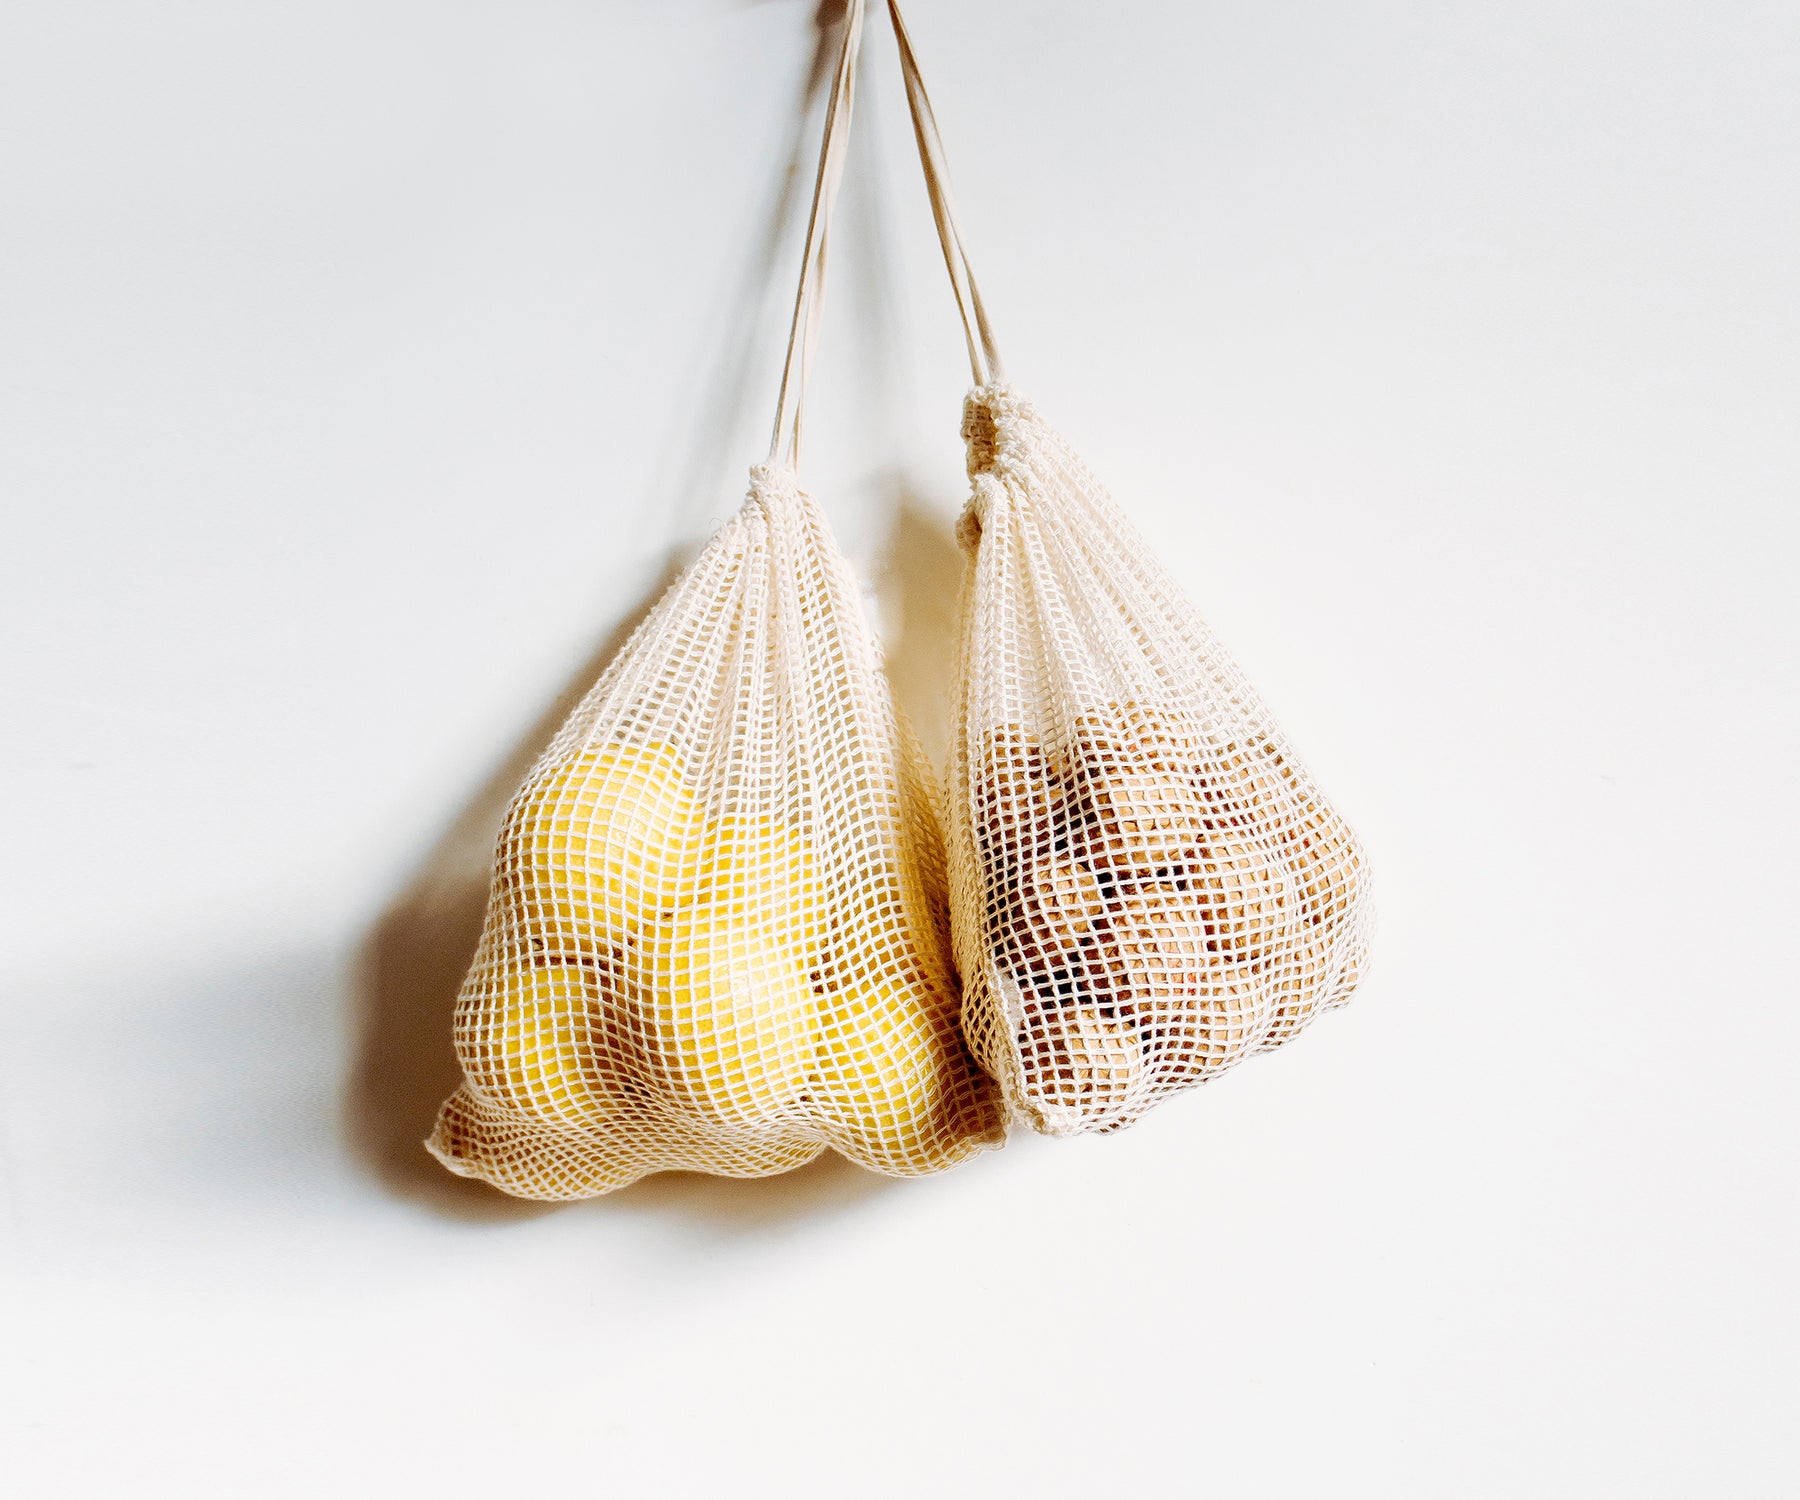 Multiple reusable mesh produce bags filled with a mix of fruits and vegetables